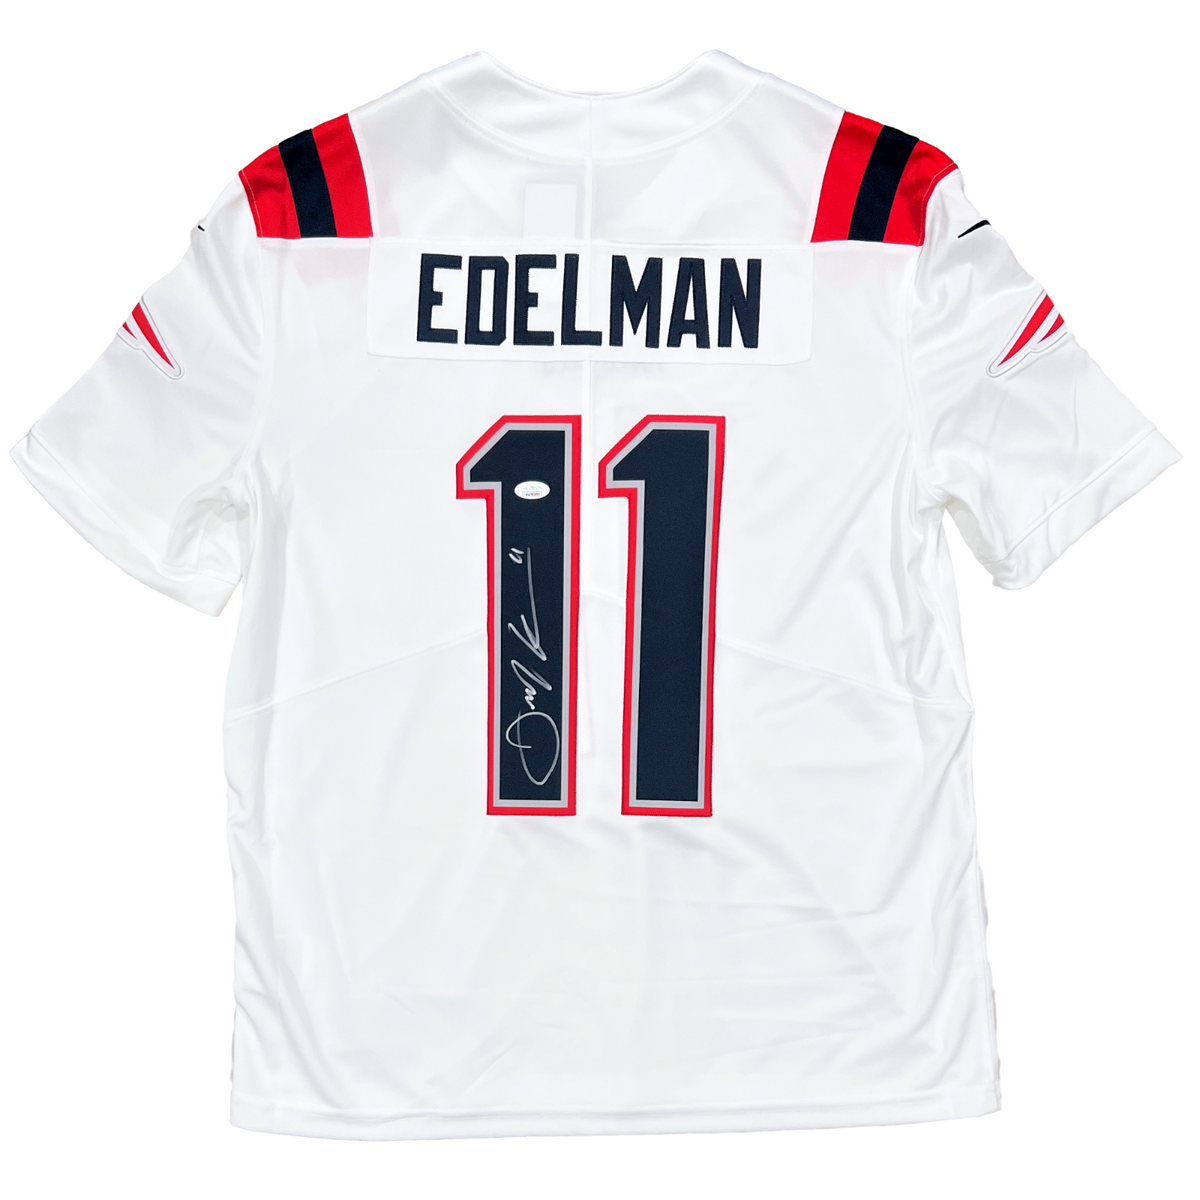 NFL Autographed Jerseys Archives - New England Picture